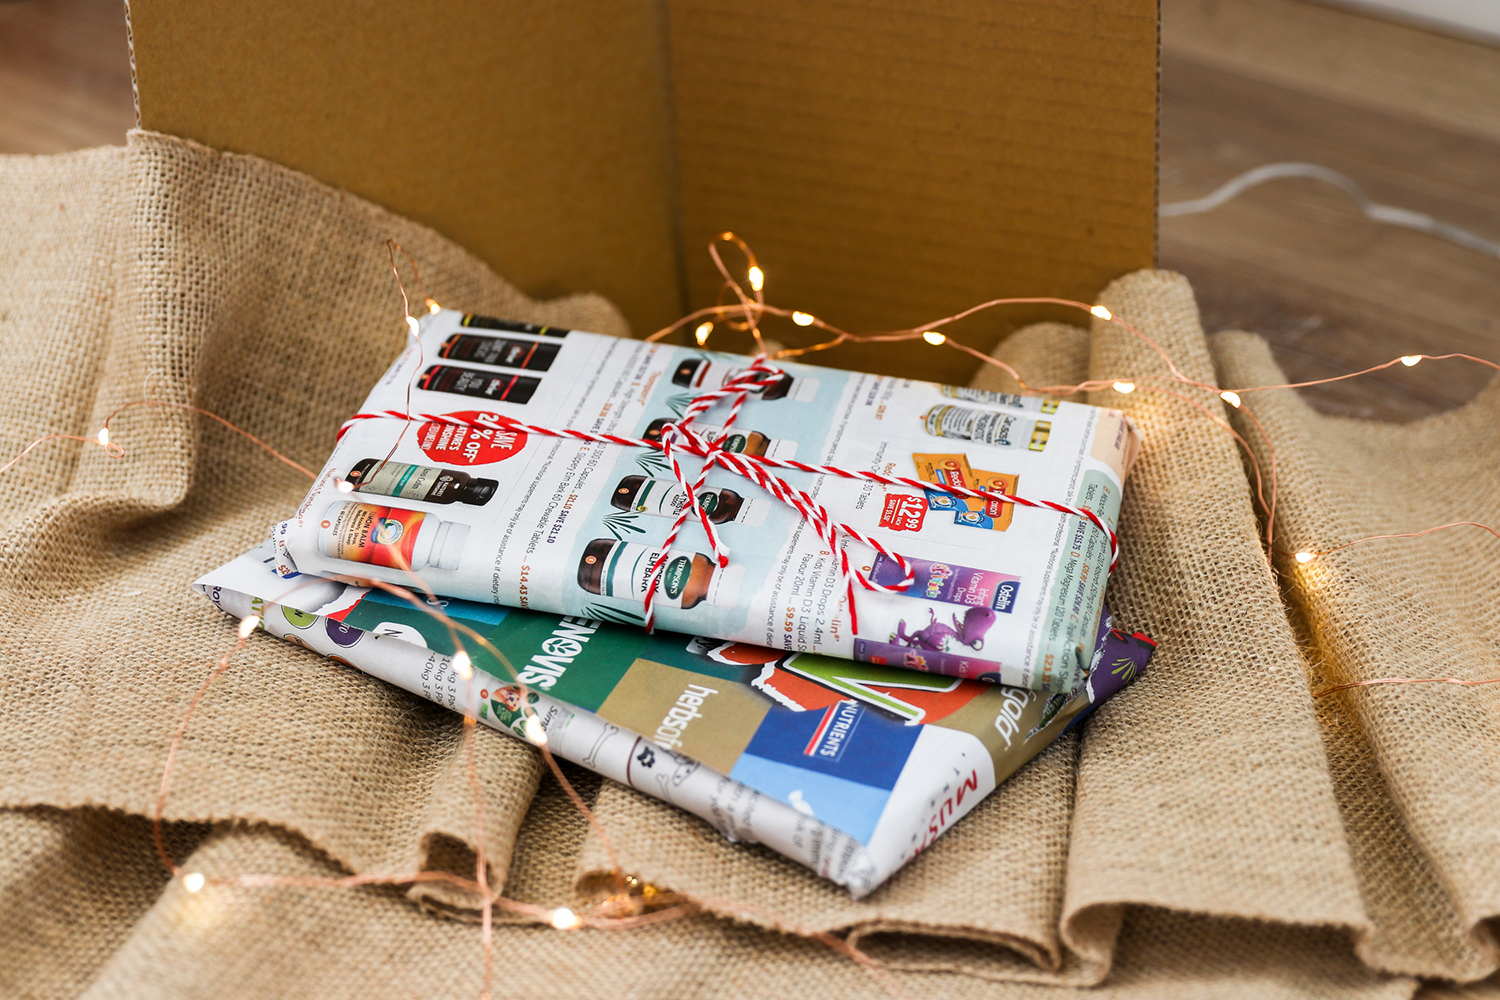  Eco Friendly Gift Wrapping Ideas| WholeLife Pharmacy & Healthfoods